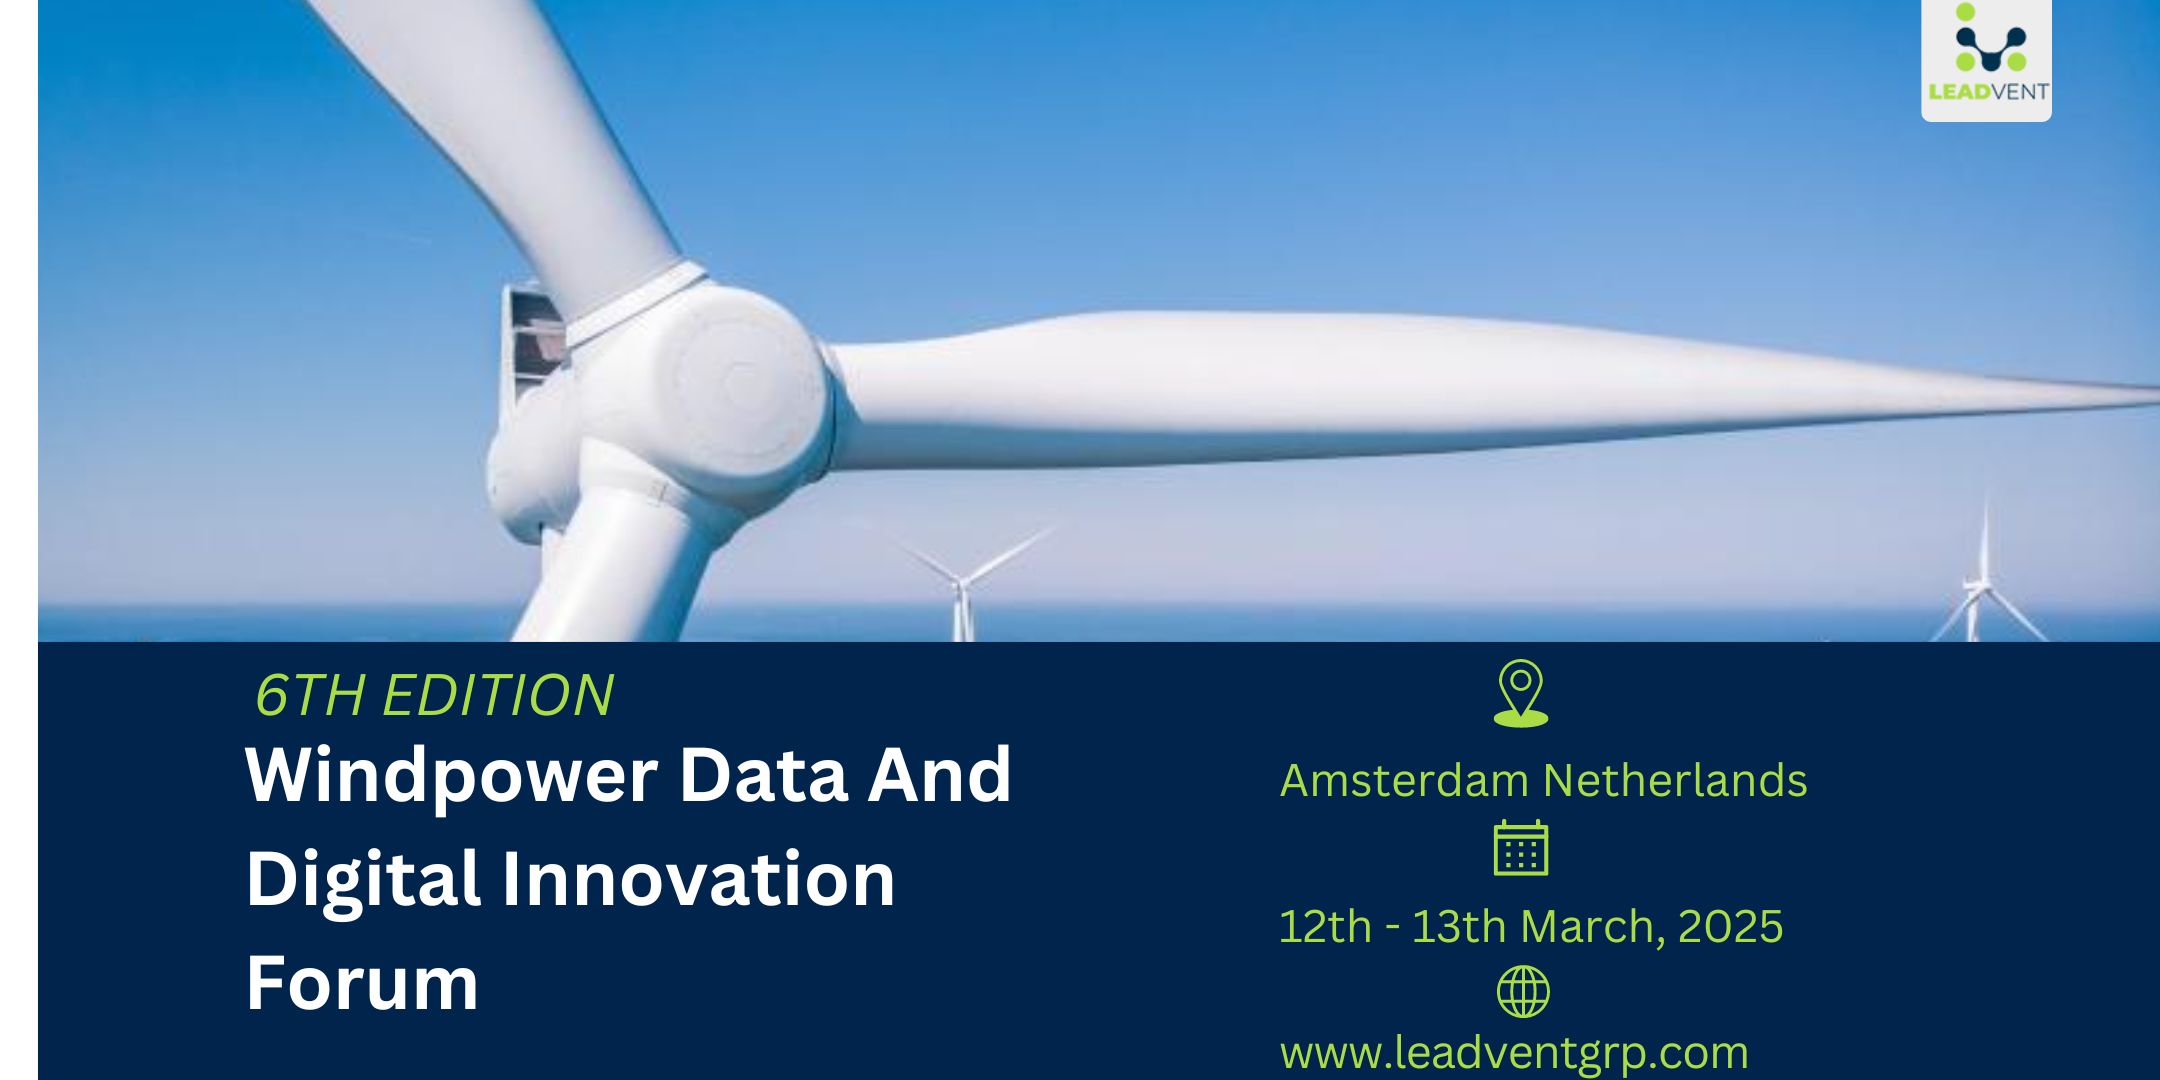 6th Edition Windpower Data and Digital Innovation Forum organized by Leadvent Group